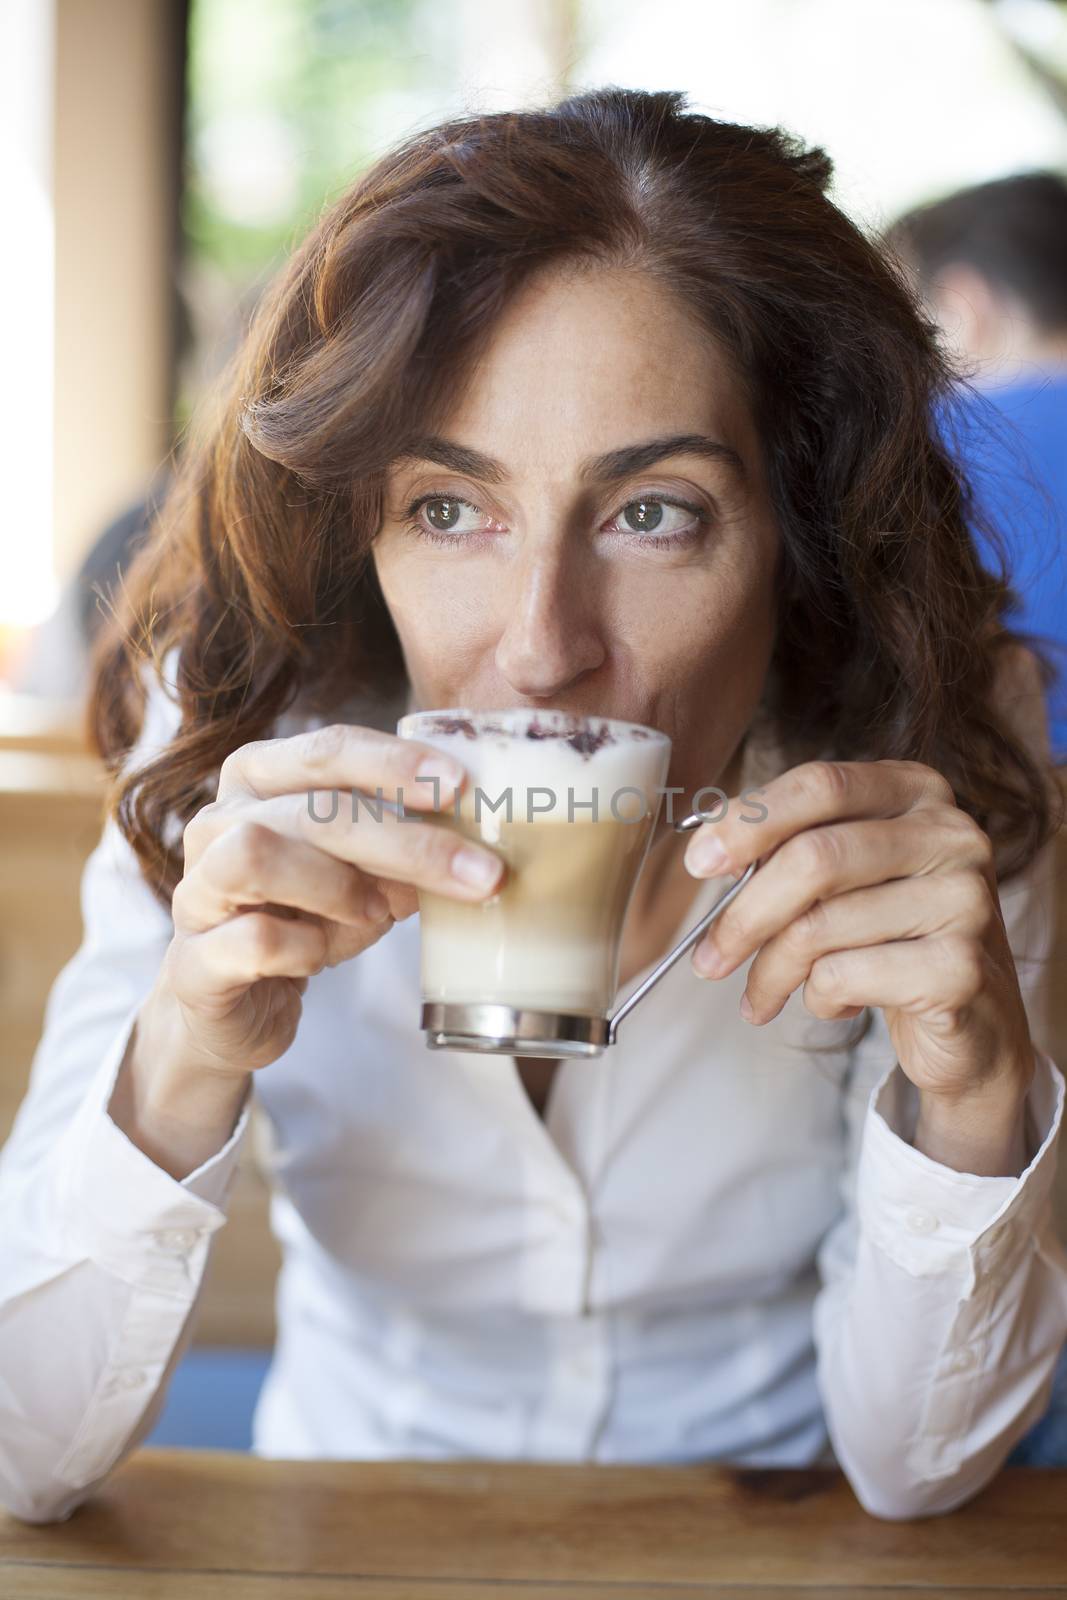 portrait of woman with white shirt drinking cappuccino coffee cup in hands on light brown wooden table cafe